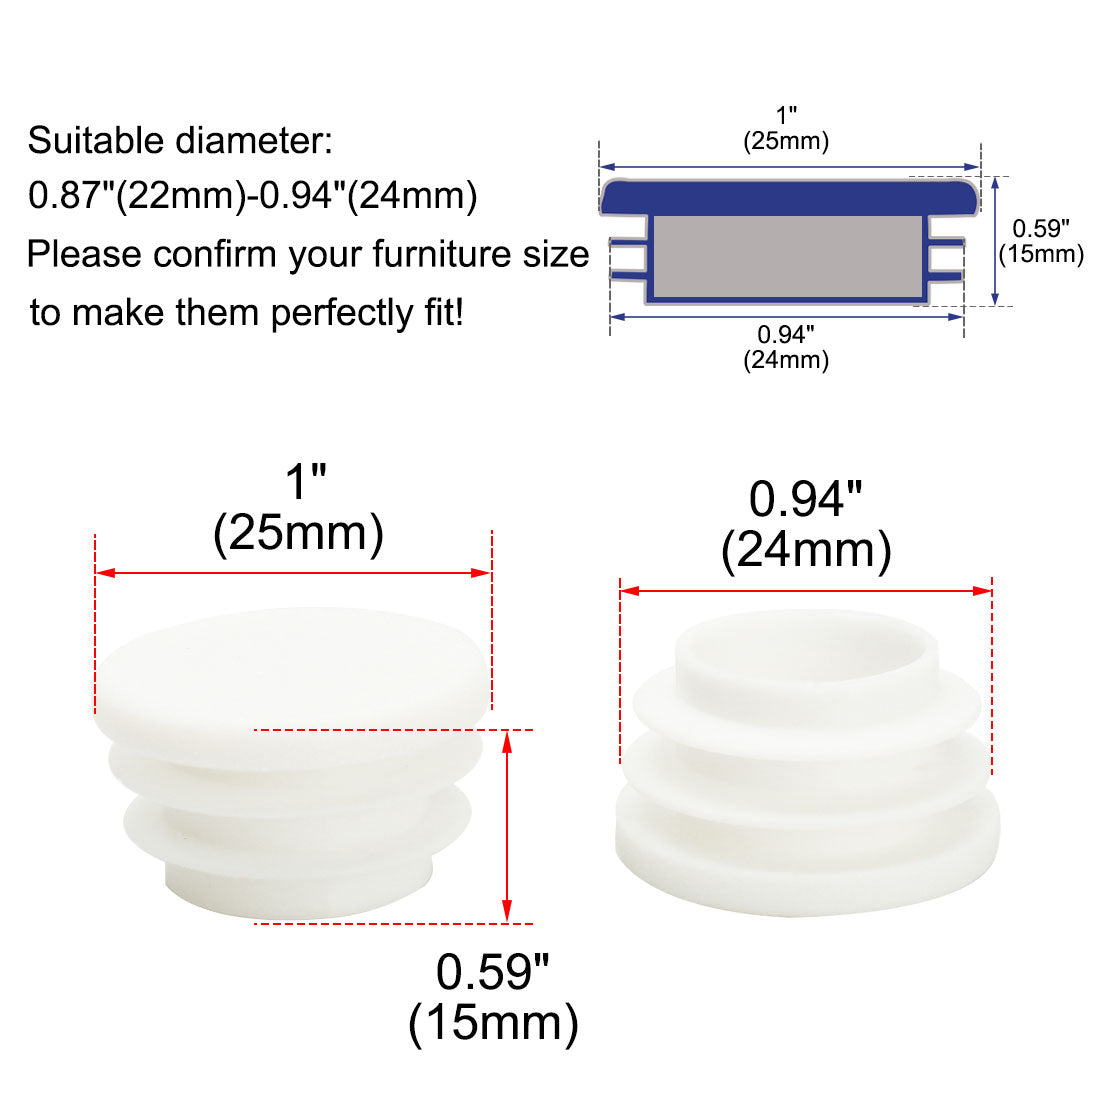 Uxcell Uxcell 3/4" 19mm OD Plastic Round Ribbed Tube Insert Pipe Tubing End Covers Caps White 8pcs, 0.63"-0.71" Inner Dia Furniture Glide Chair Feet Floor Protector